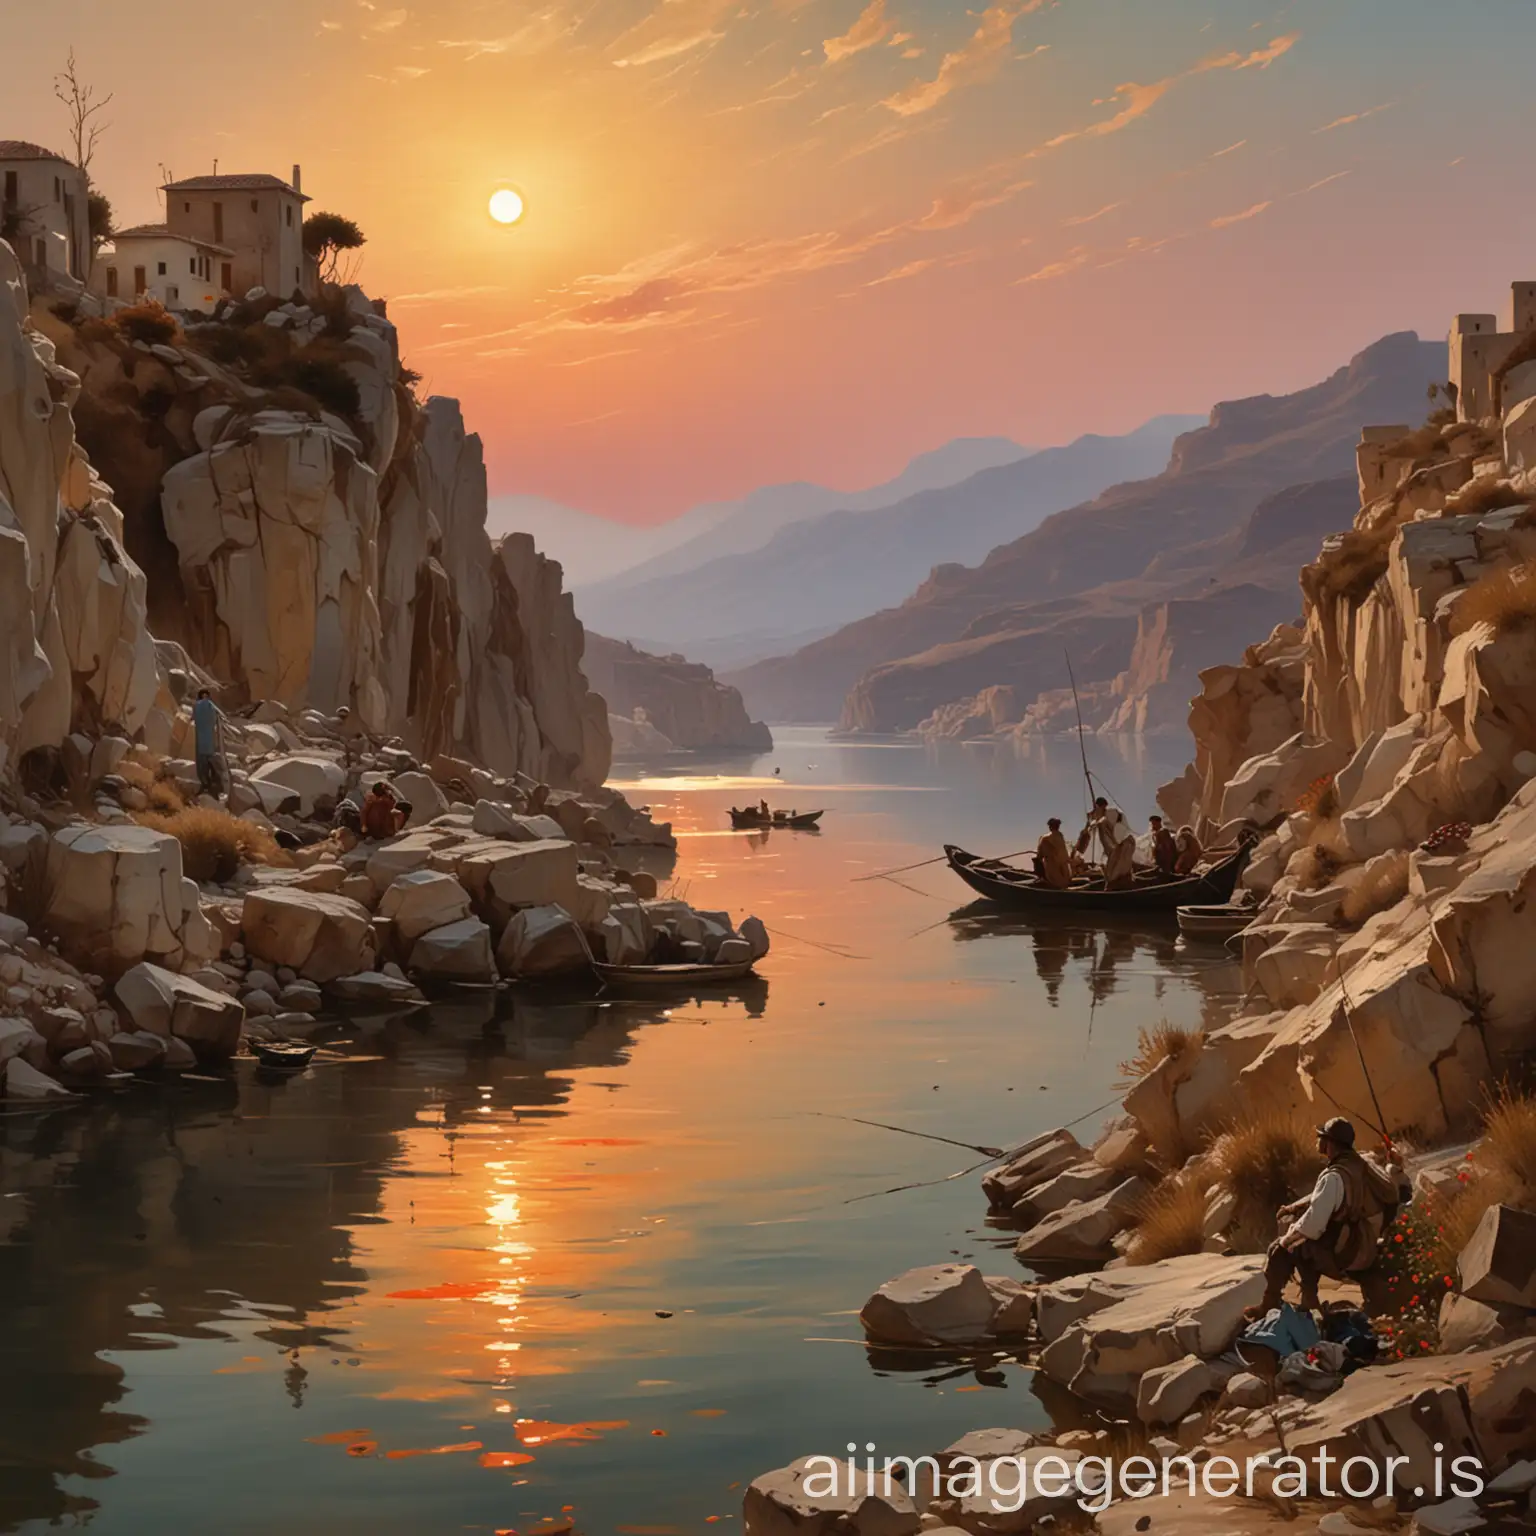 a sunset fishermen's painting by John Singer Sargent levitated in a dystopian greek landscape